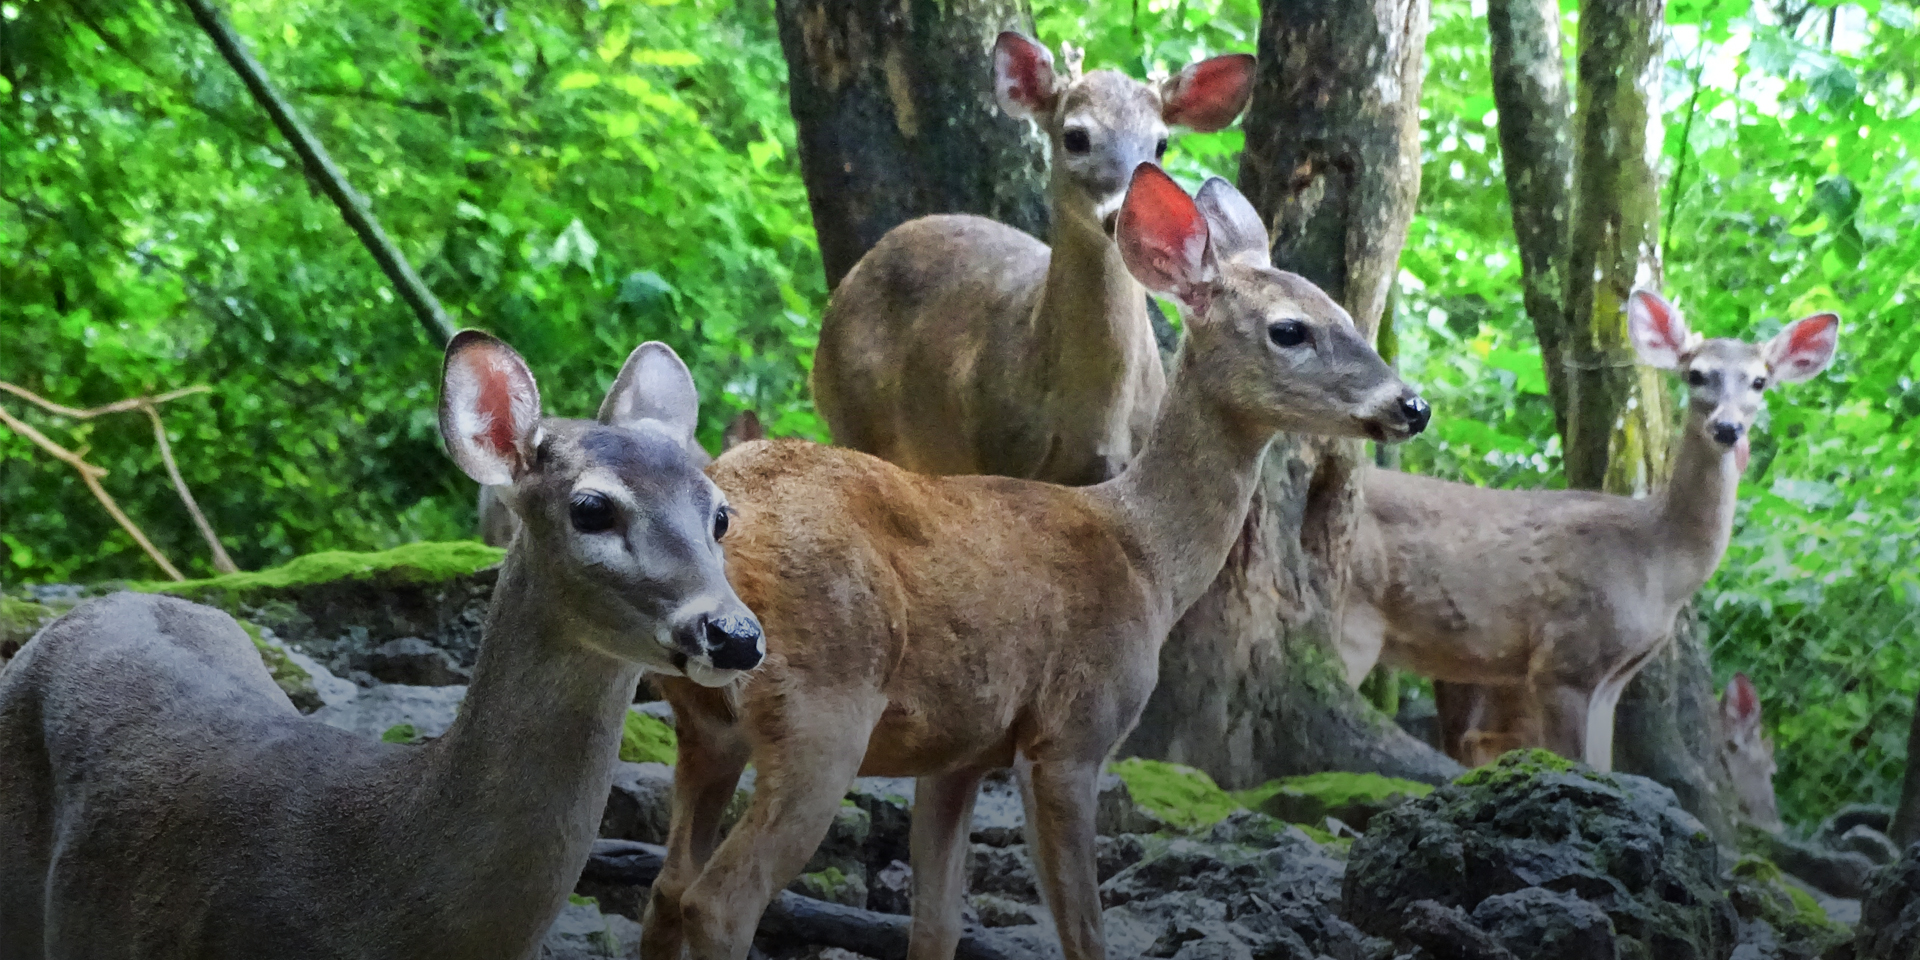 Several fawns standing together in a forest.